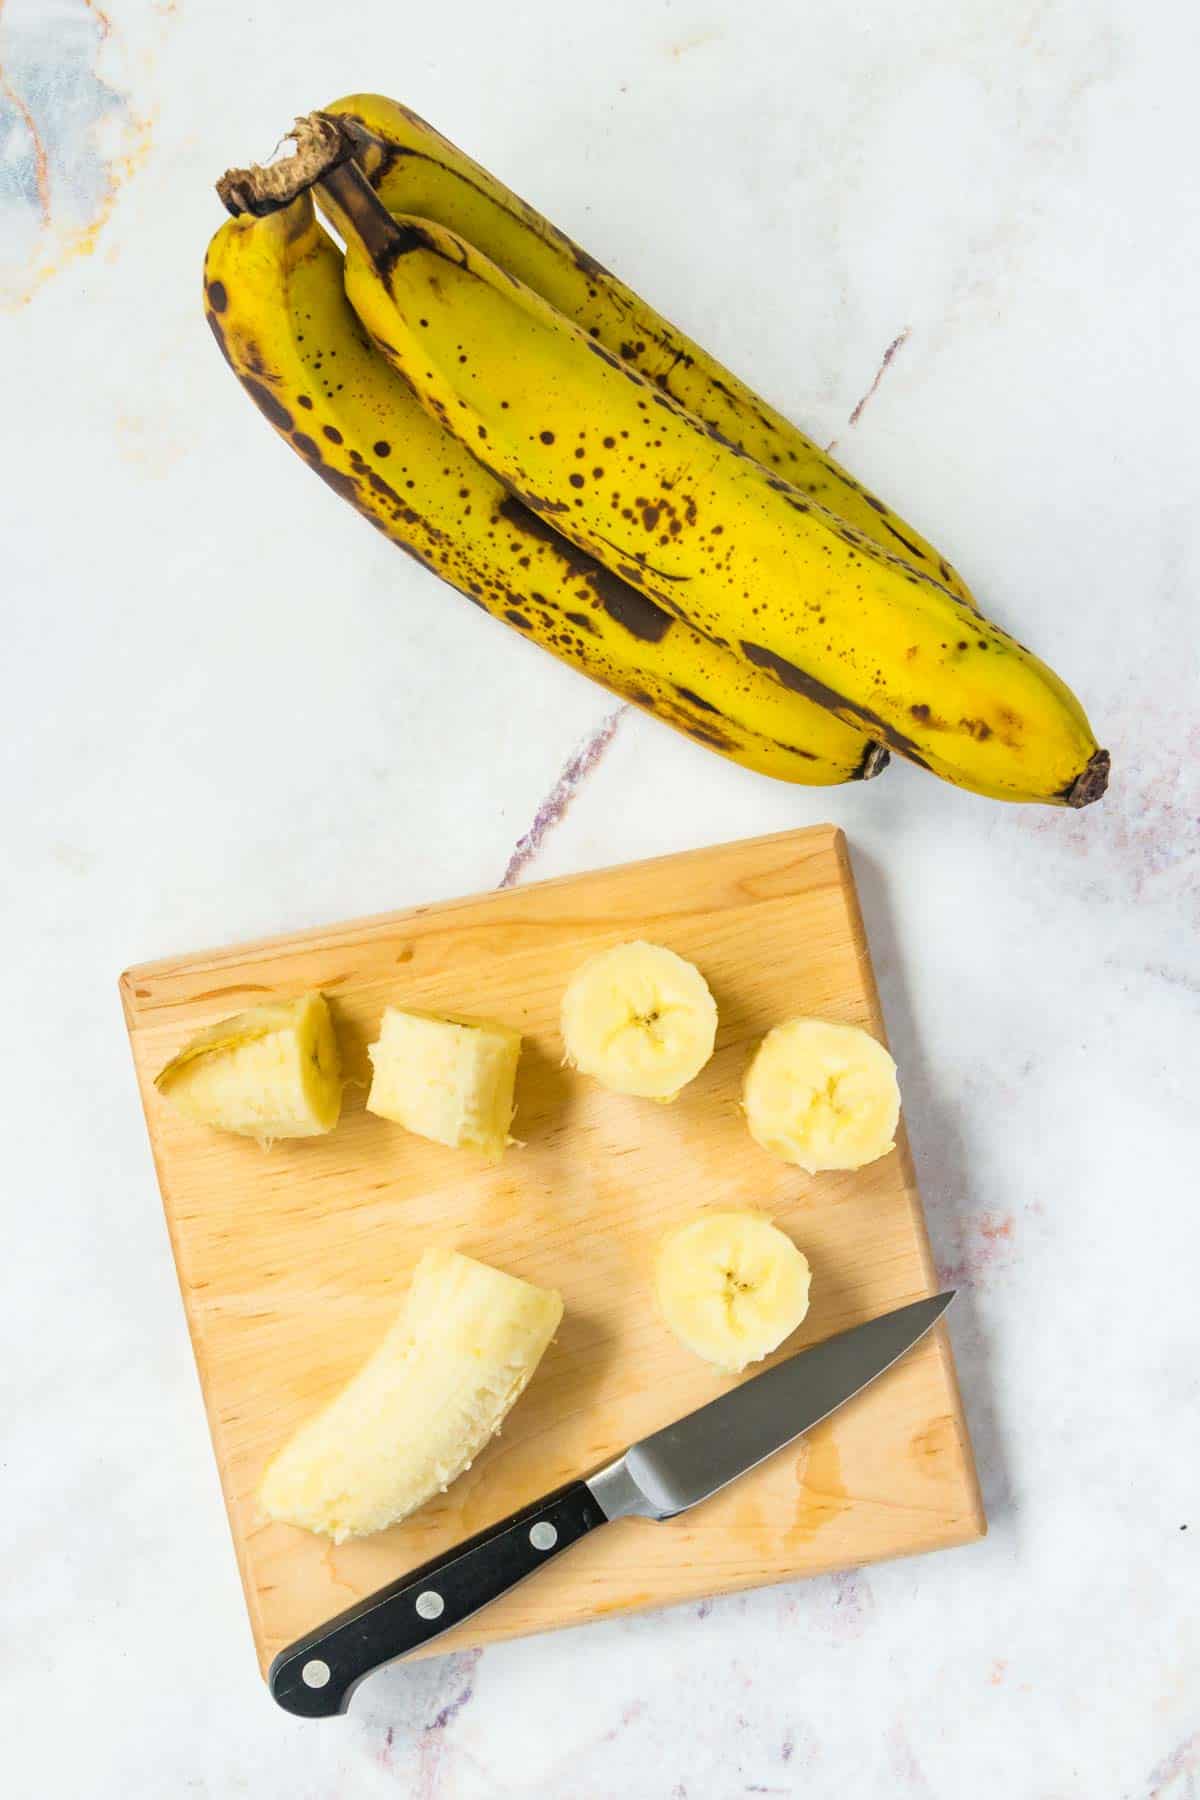 A bunch of bananas next to a cutting board where another banana is being sliced